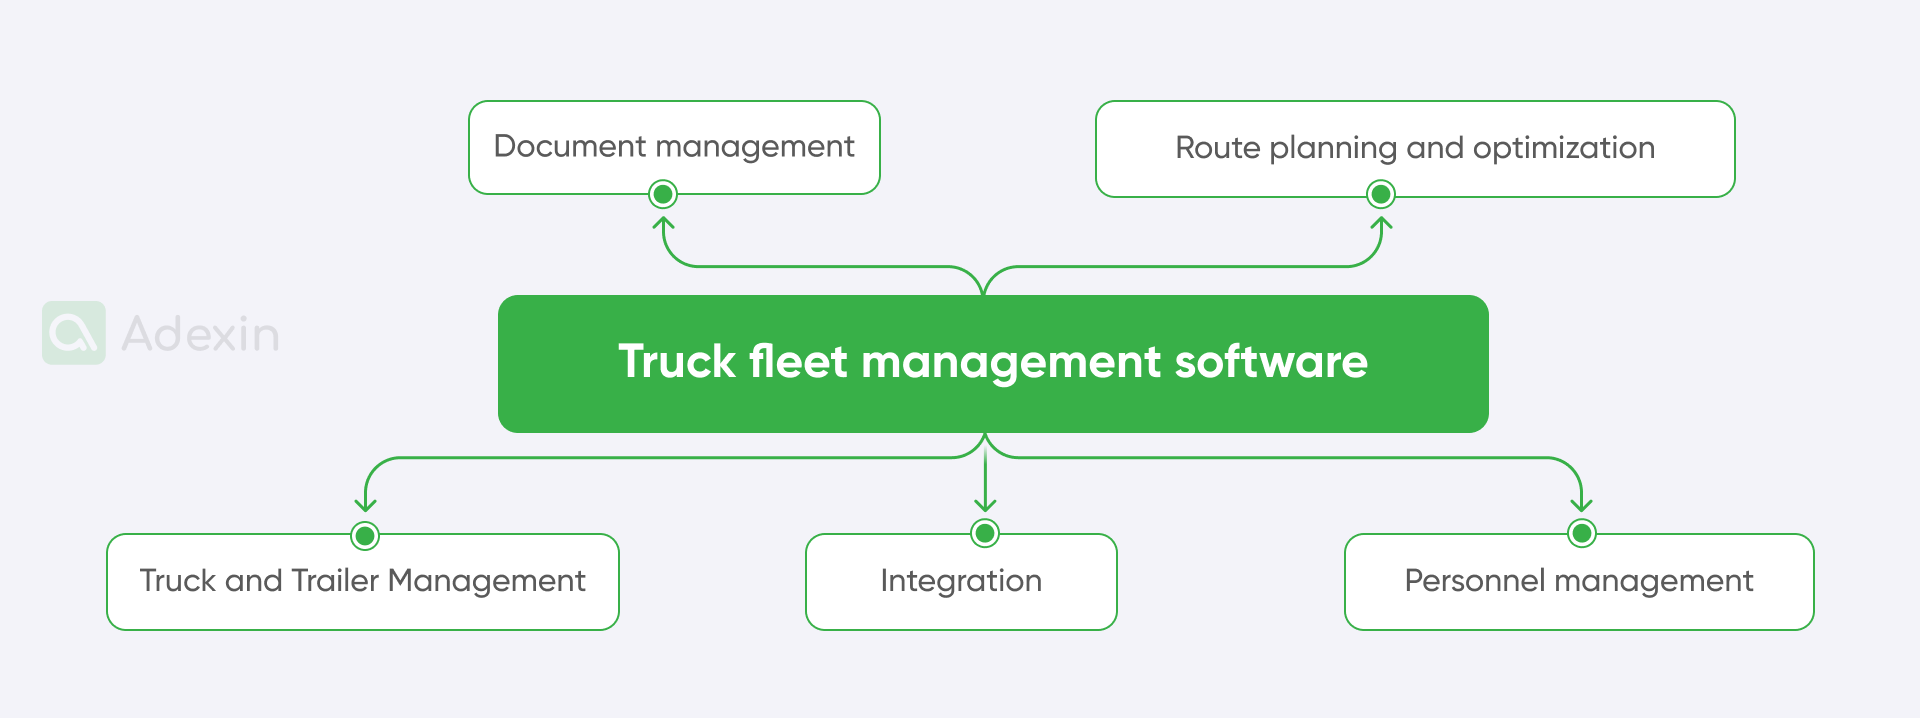 The solutions embedded into truck fleet management software